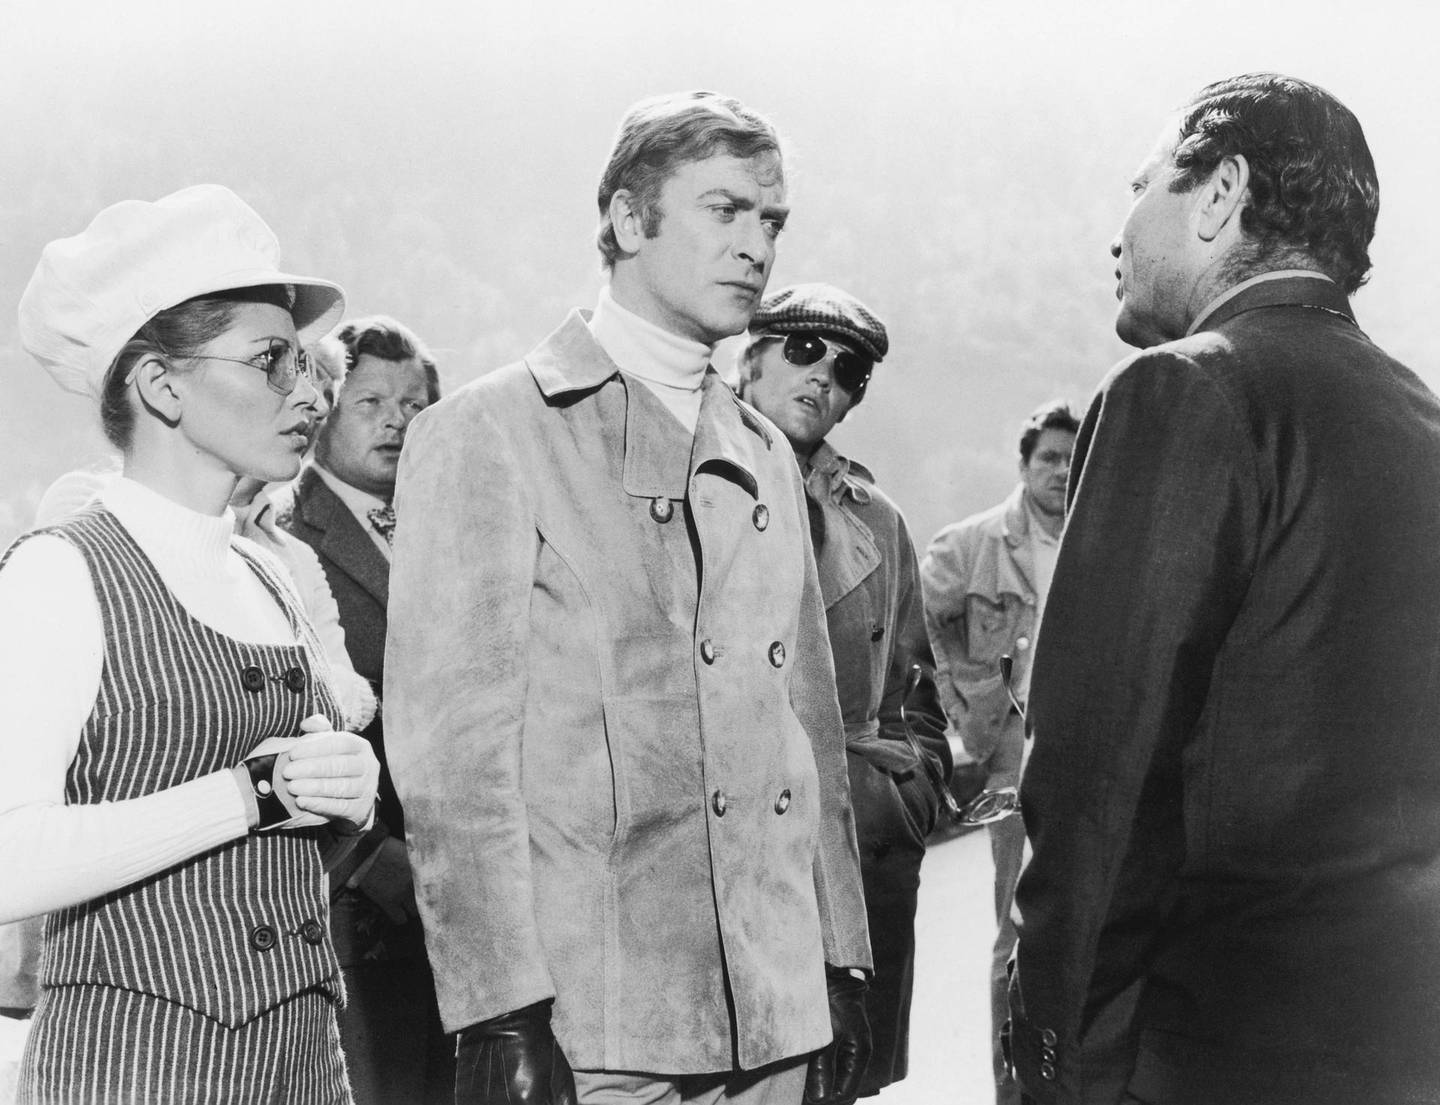 From left to right, Margaret Blye as Lorna, Benny Hill (1924 - 1992) as Professor Peach, Michael Caine as Charlie Croker, Michael Standing as Arthur and Raf Vallone (1916 - 2002) as Altabani in Paramount Pictures' 'The Italian Job', 1969. (Photo by Archive Photos/Getty Images)